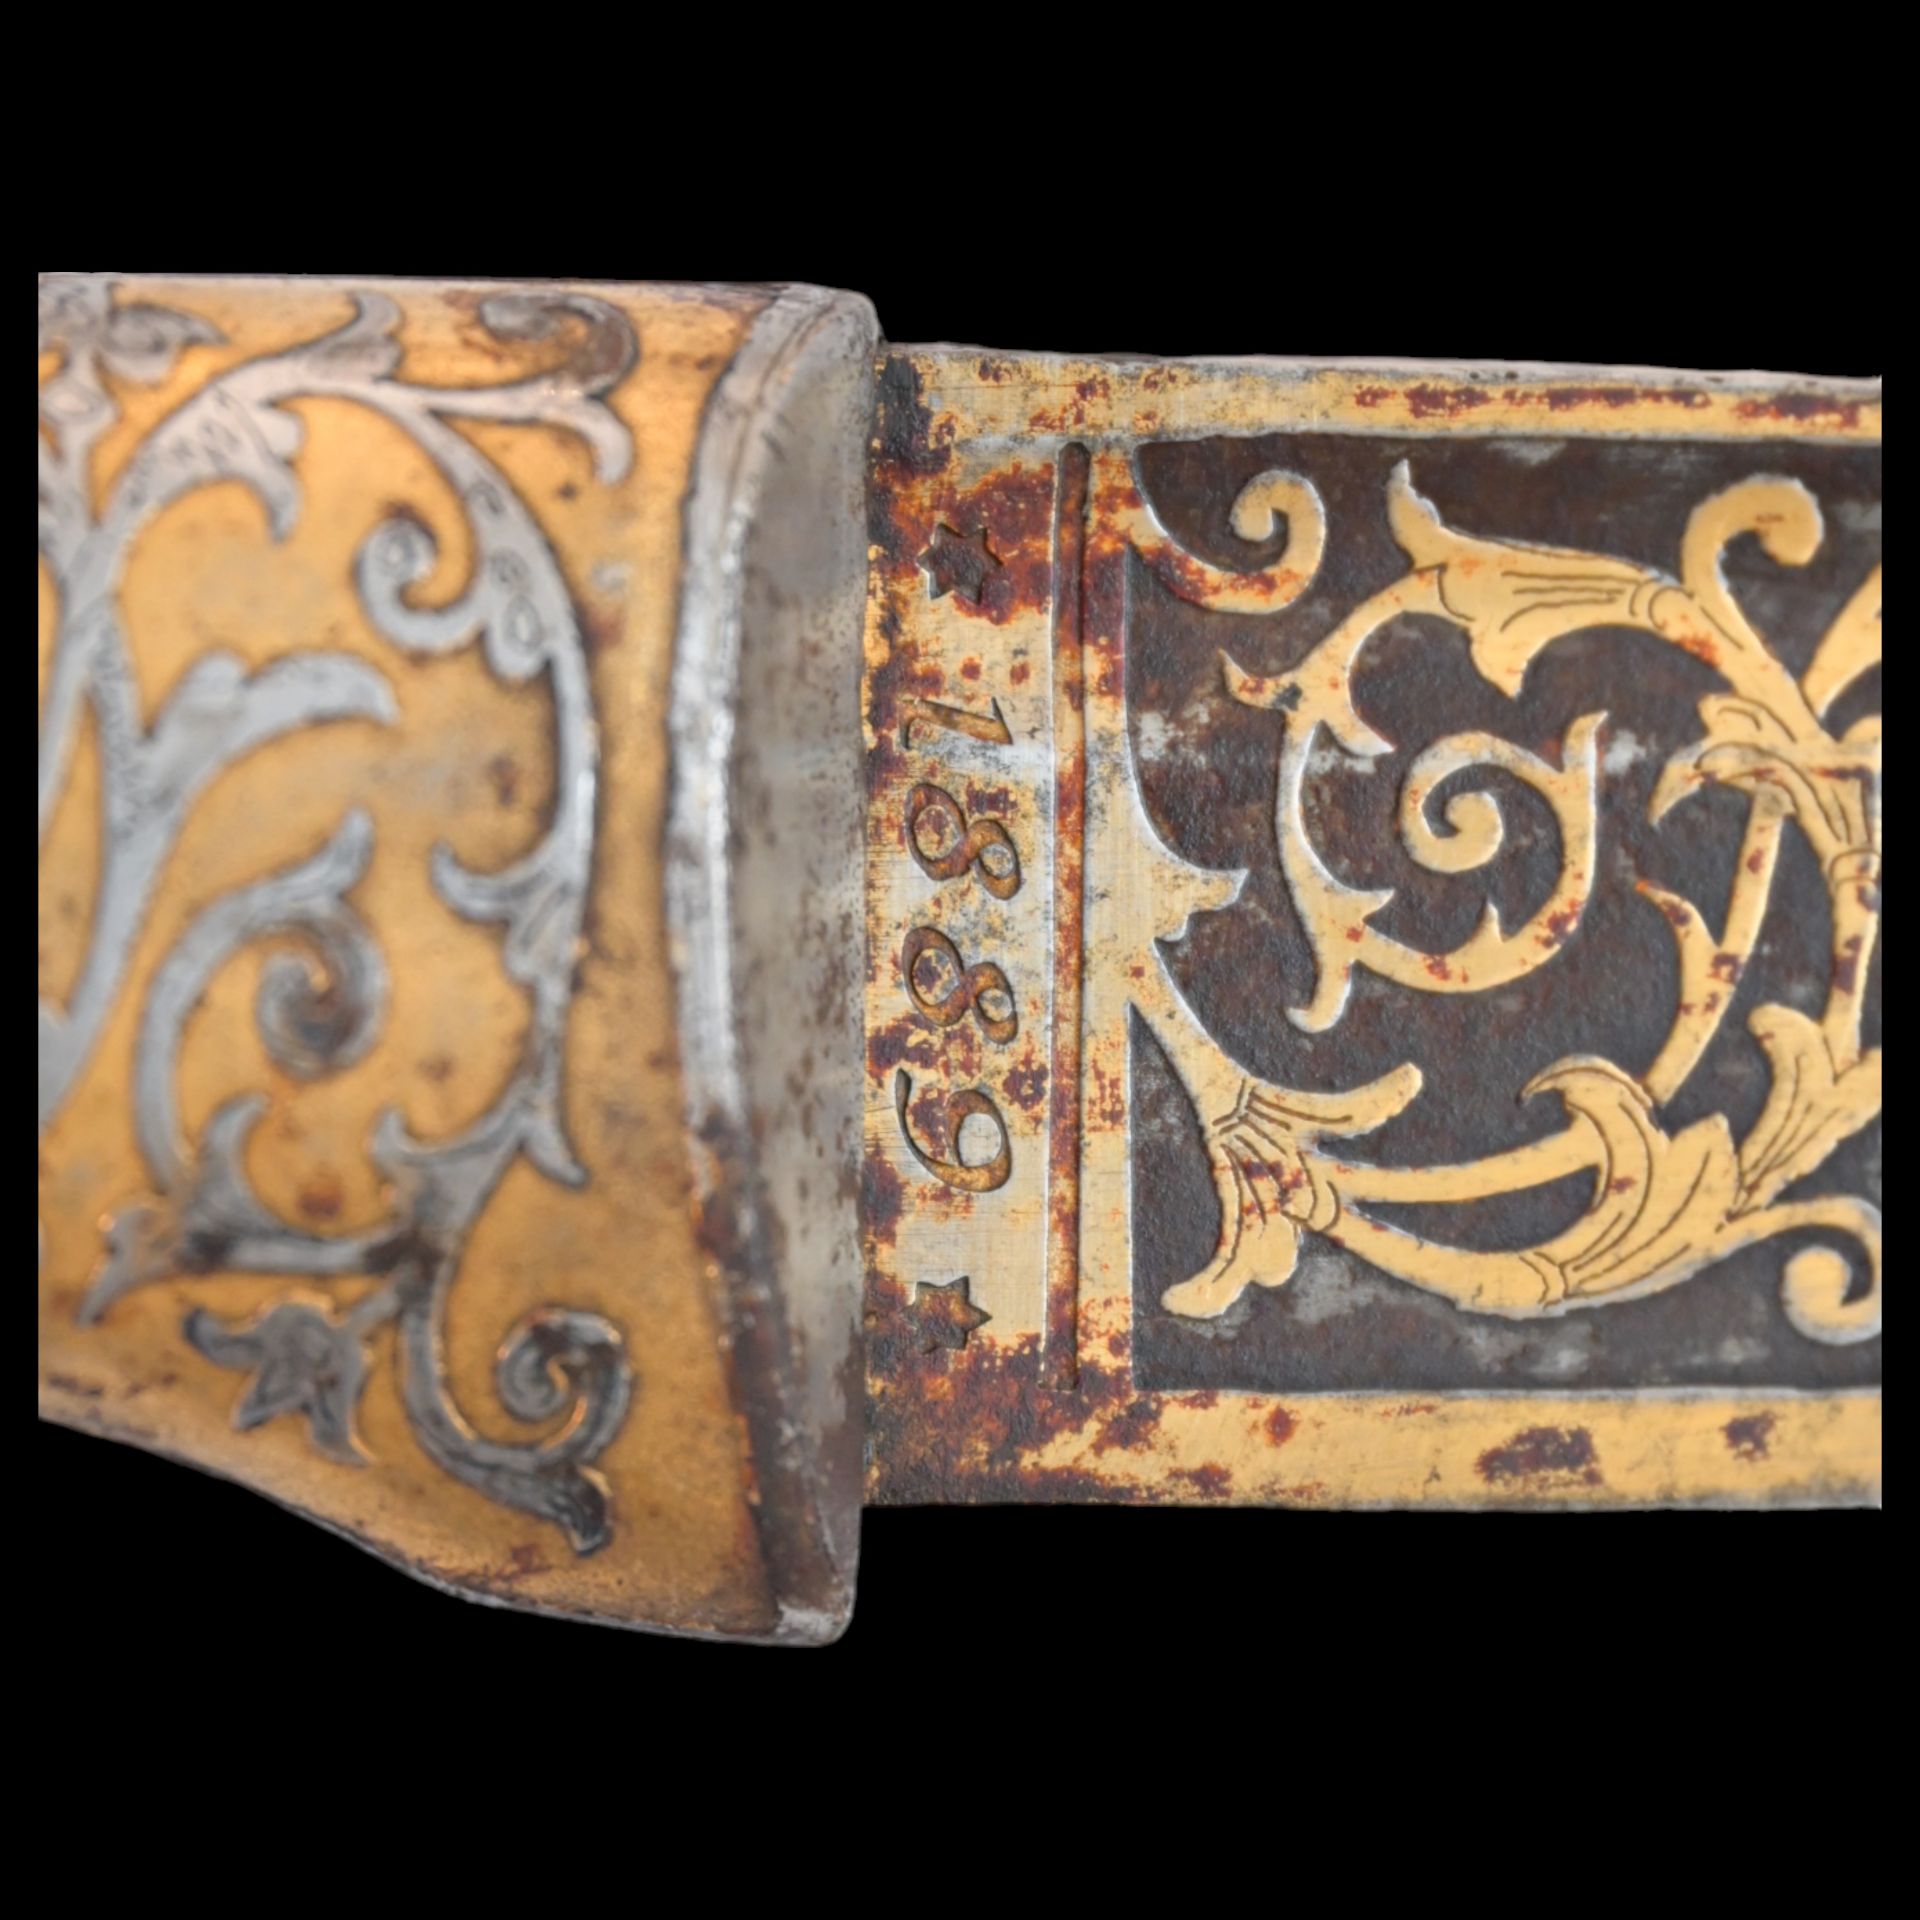 RARE HUNTING KNIFE, DECORATED WITH GOLD AND BLUE, RUSSIAN EMPIRE, ZLATOUST, 1889. - Image 25 of 26